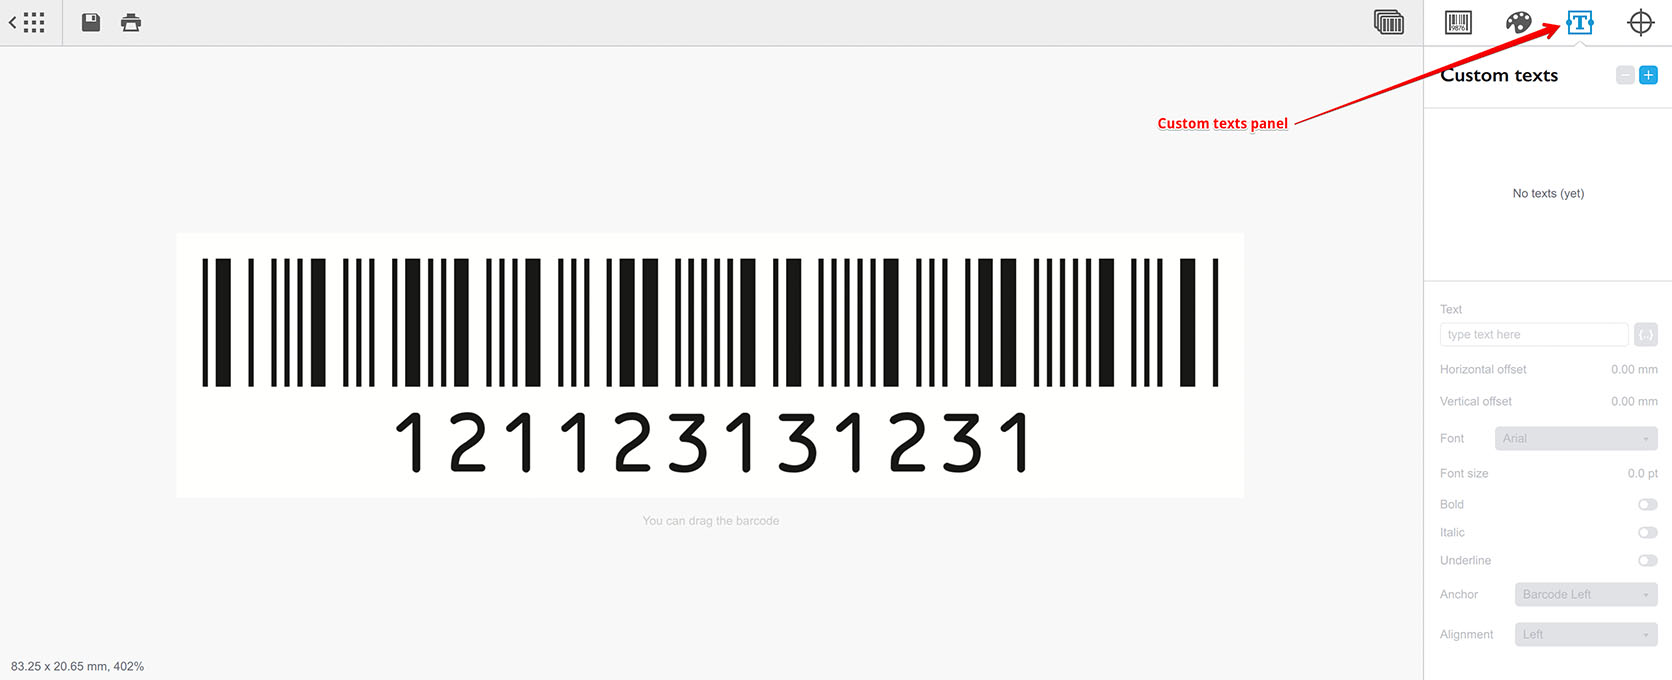 Custom texts panel of the barcode software